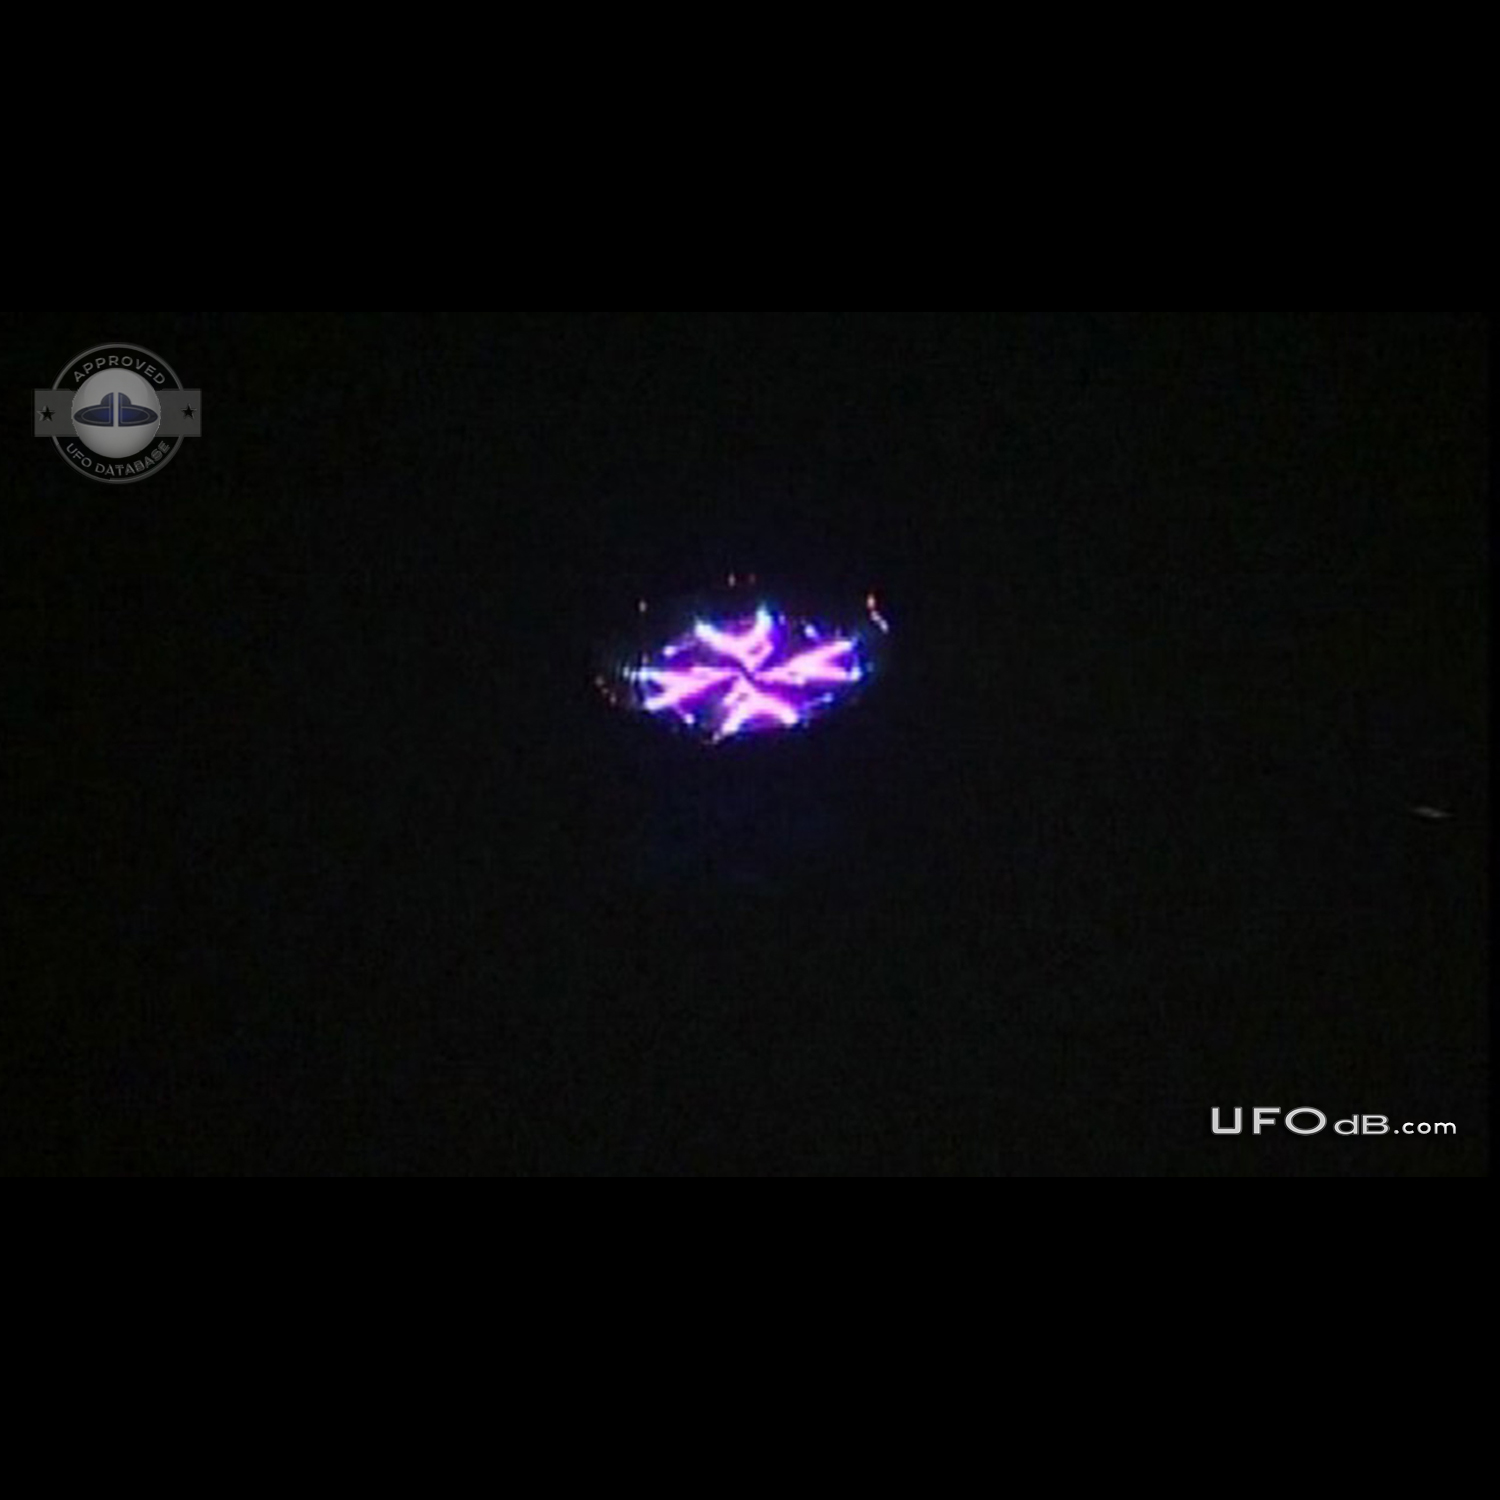 It was a big flying object UFO with purple or teal light - Los Banos UFO Picture #597-1